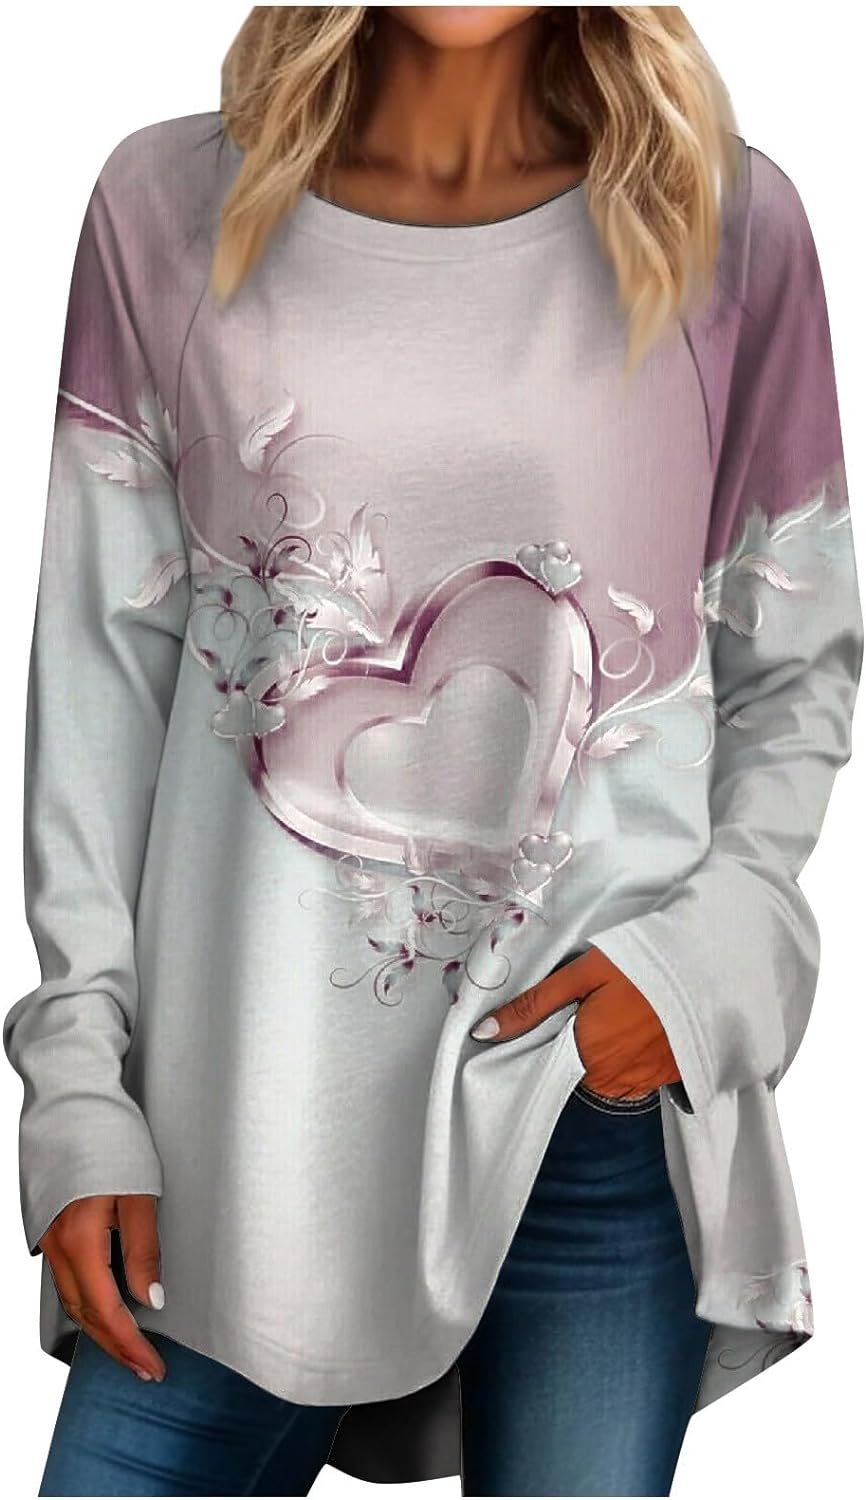 Girls Valentines Day Shirt, Women’s Casual Round Neck Valentine’s Day Printed Long Sleeve T-Shirt Top Plus Blouse